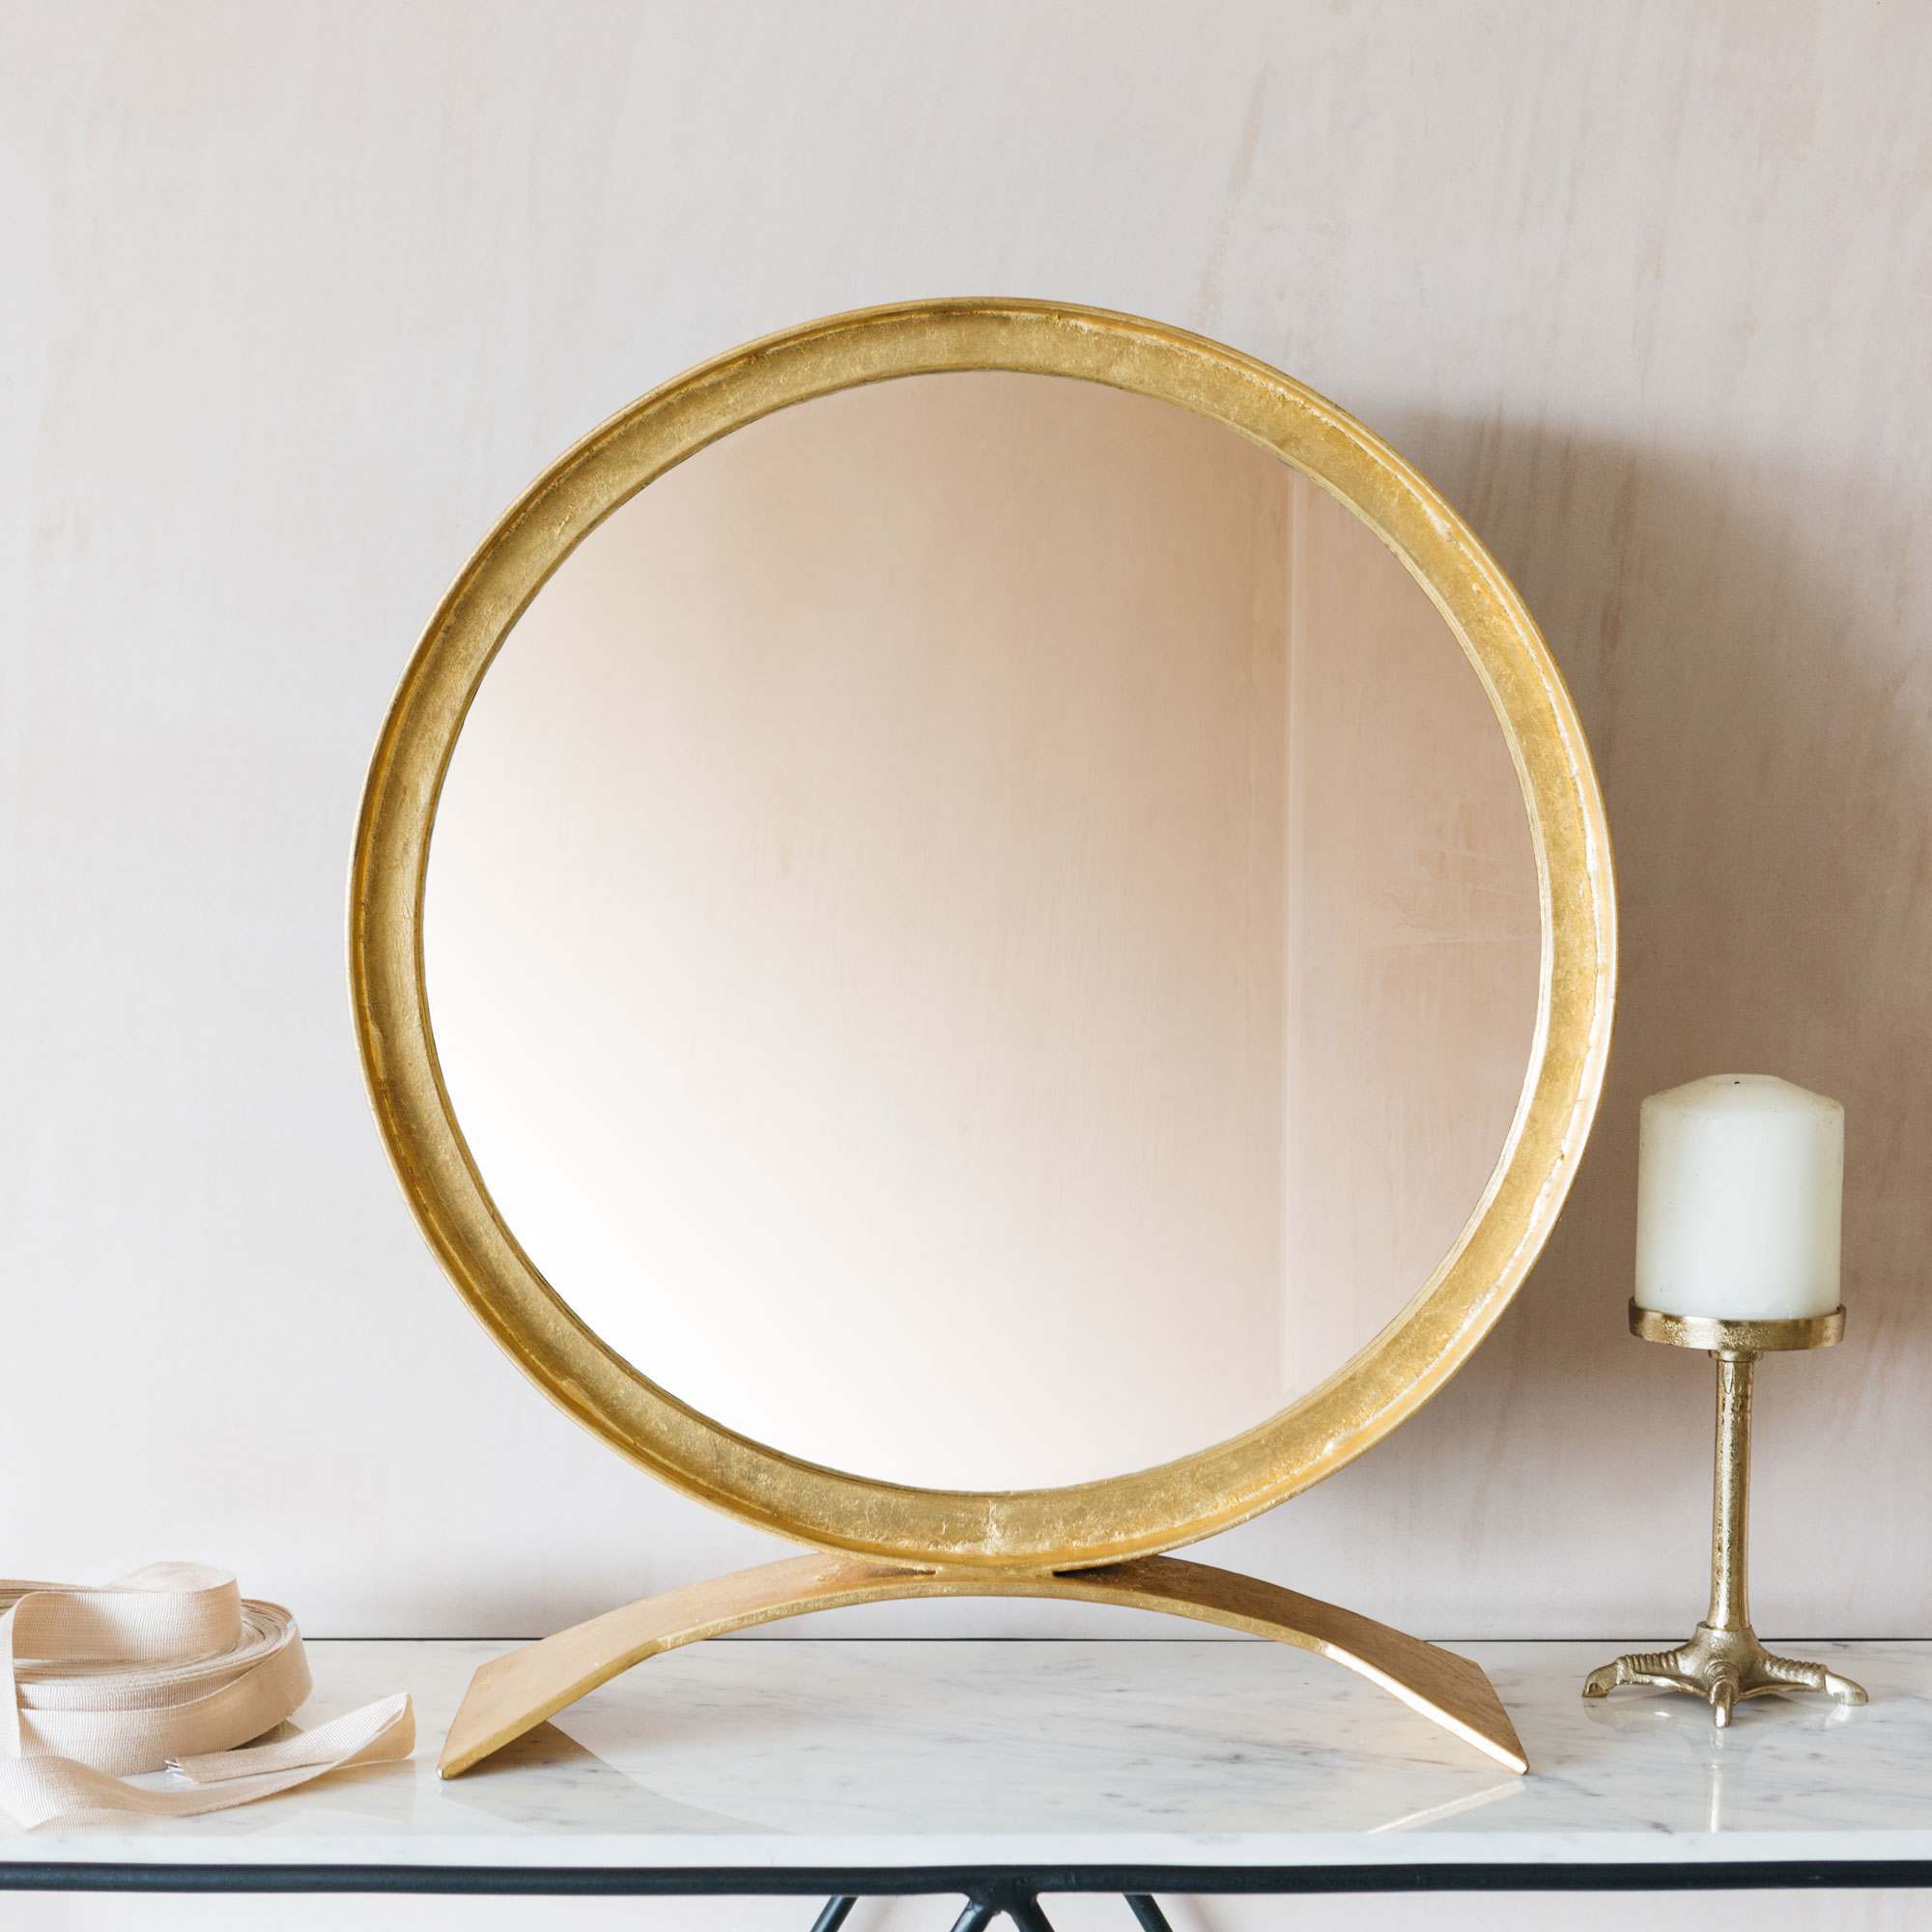 Photo of Graham and green zander small gold table mirror